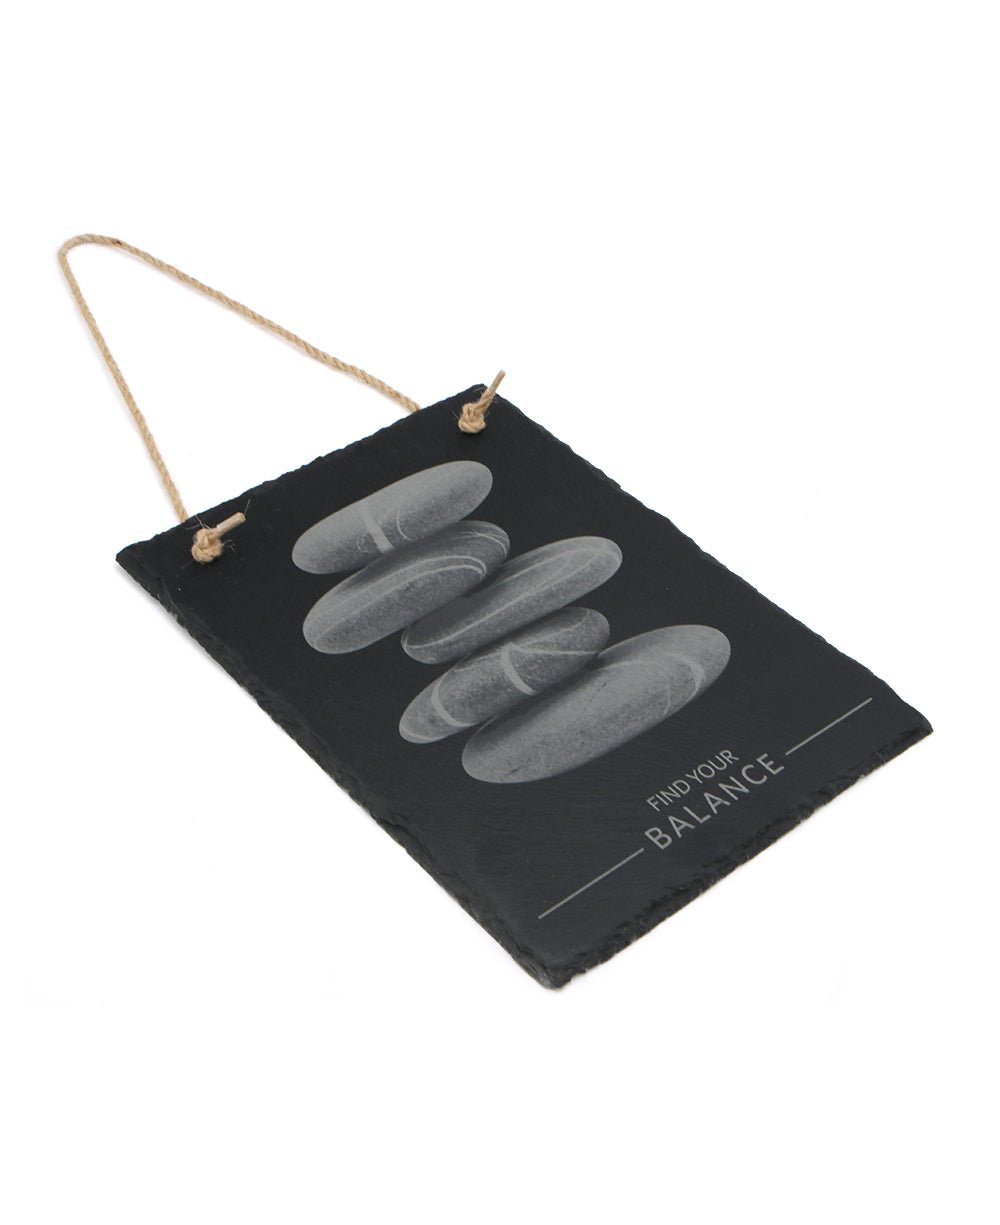 Find Your Balance Cairn Zen Rocks Slate Wall Hanging - Wind Chimes